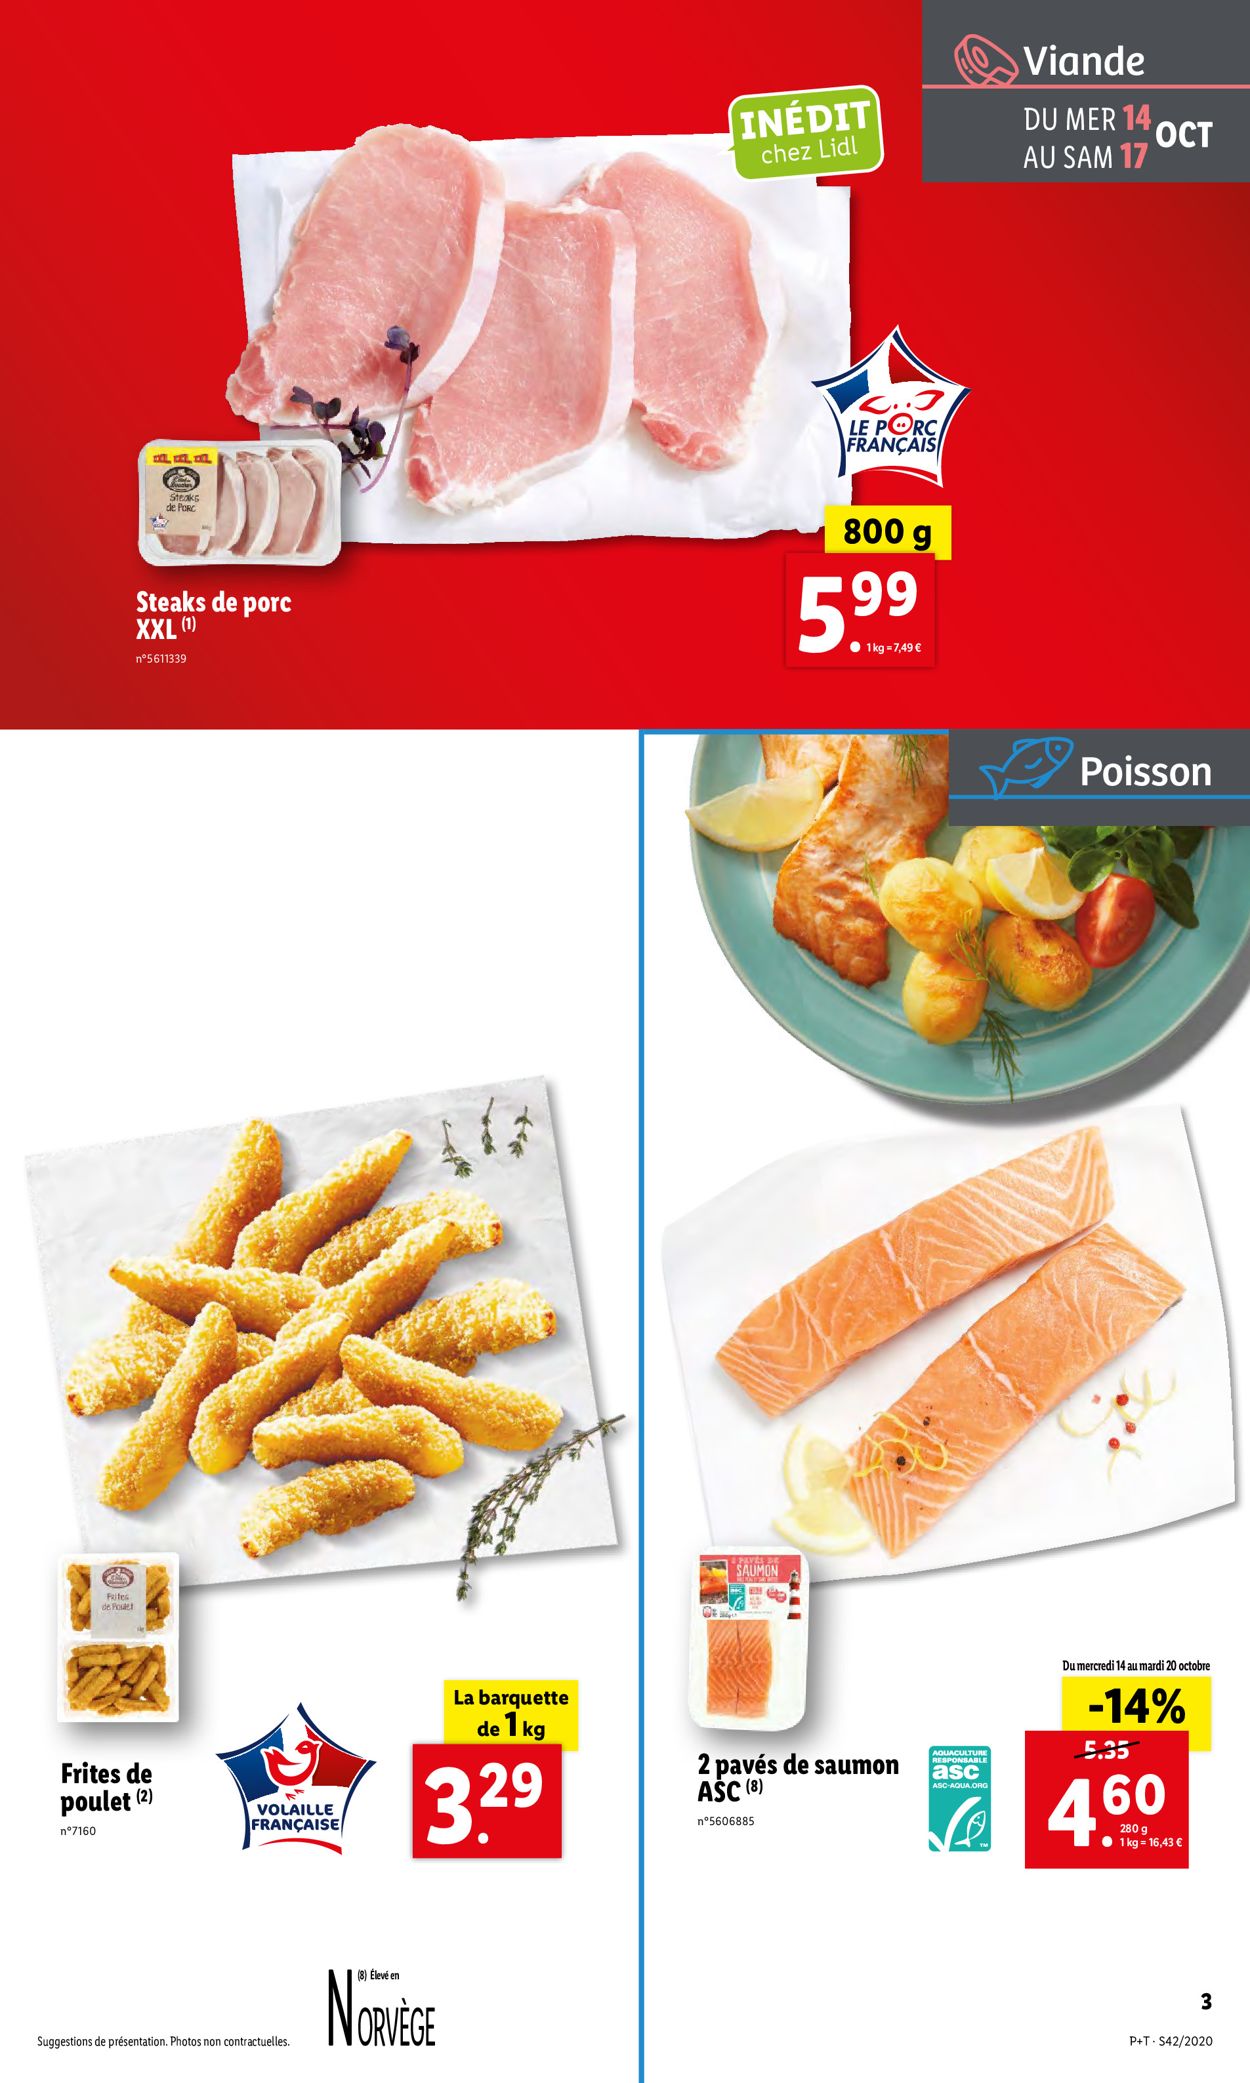 Lidl Catalogue - 14.10-20.10.2020 (Page 3)